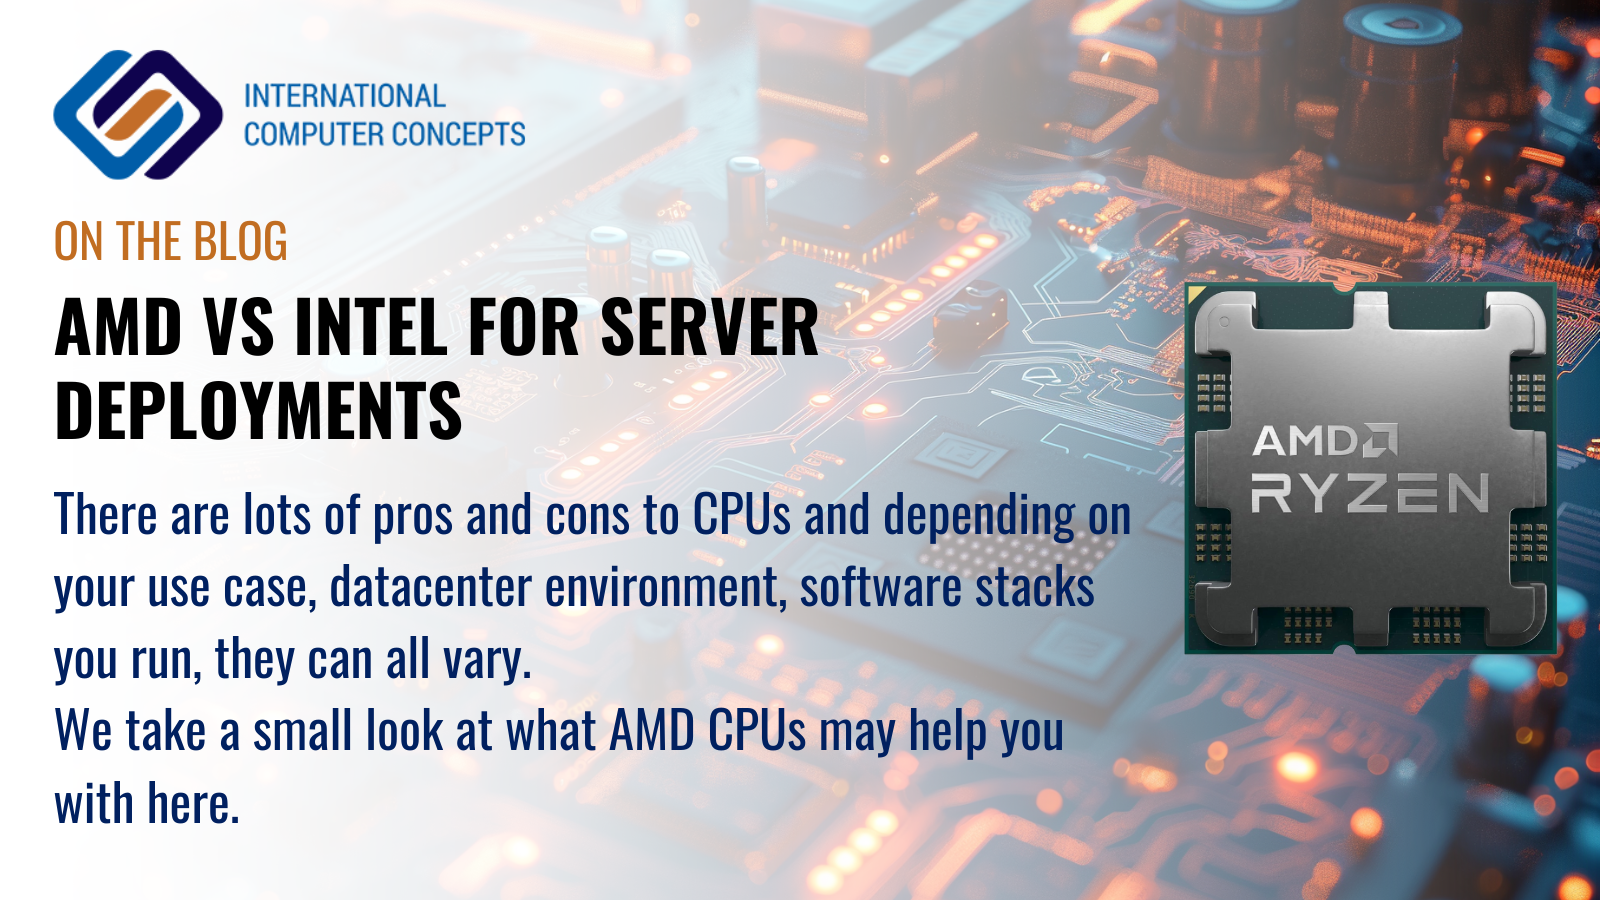 AMD vs Intel for Server Deployments: a look at AMD